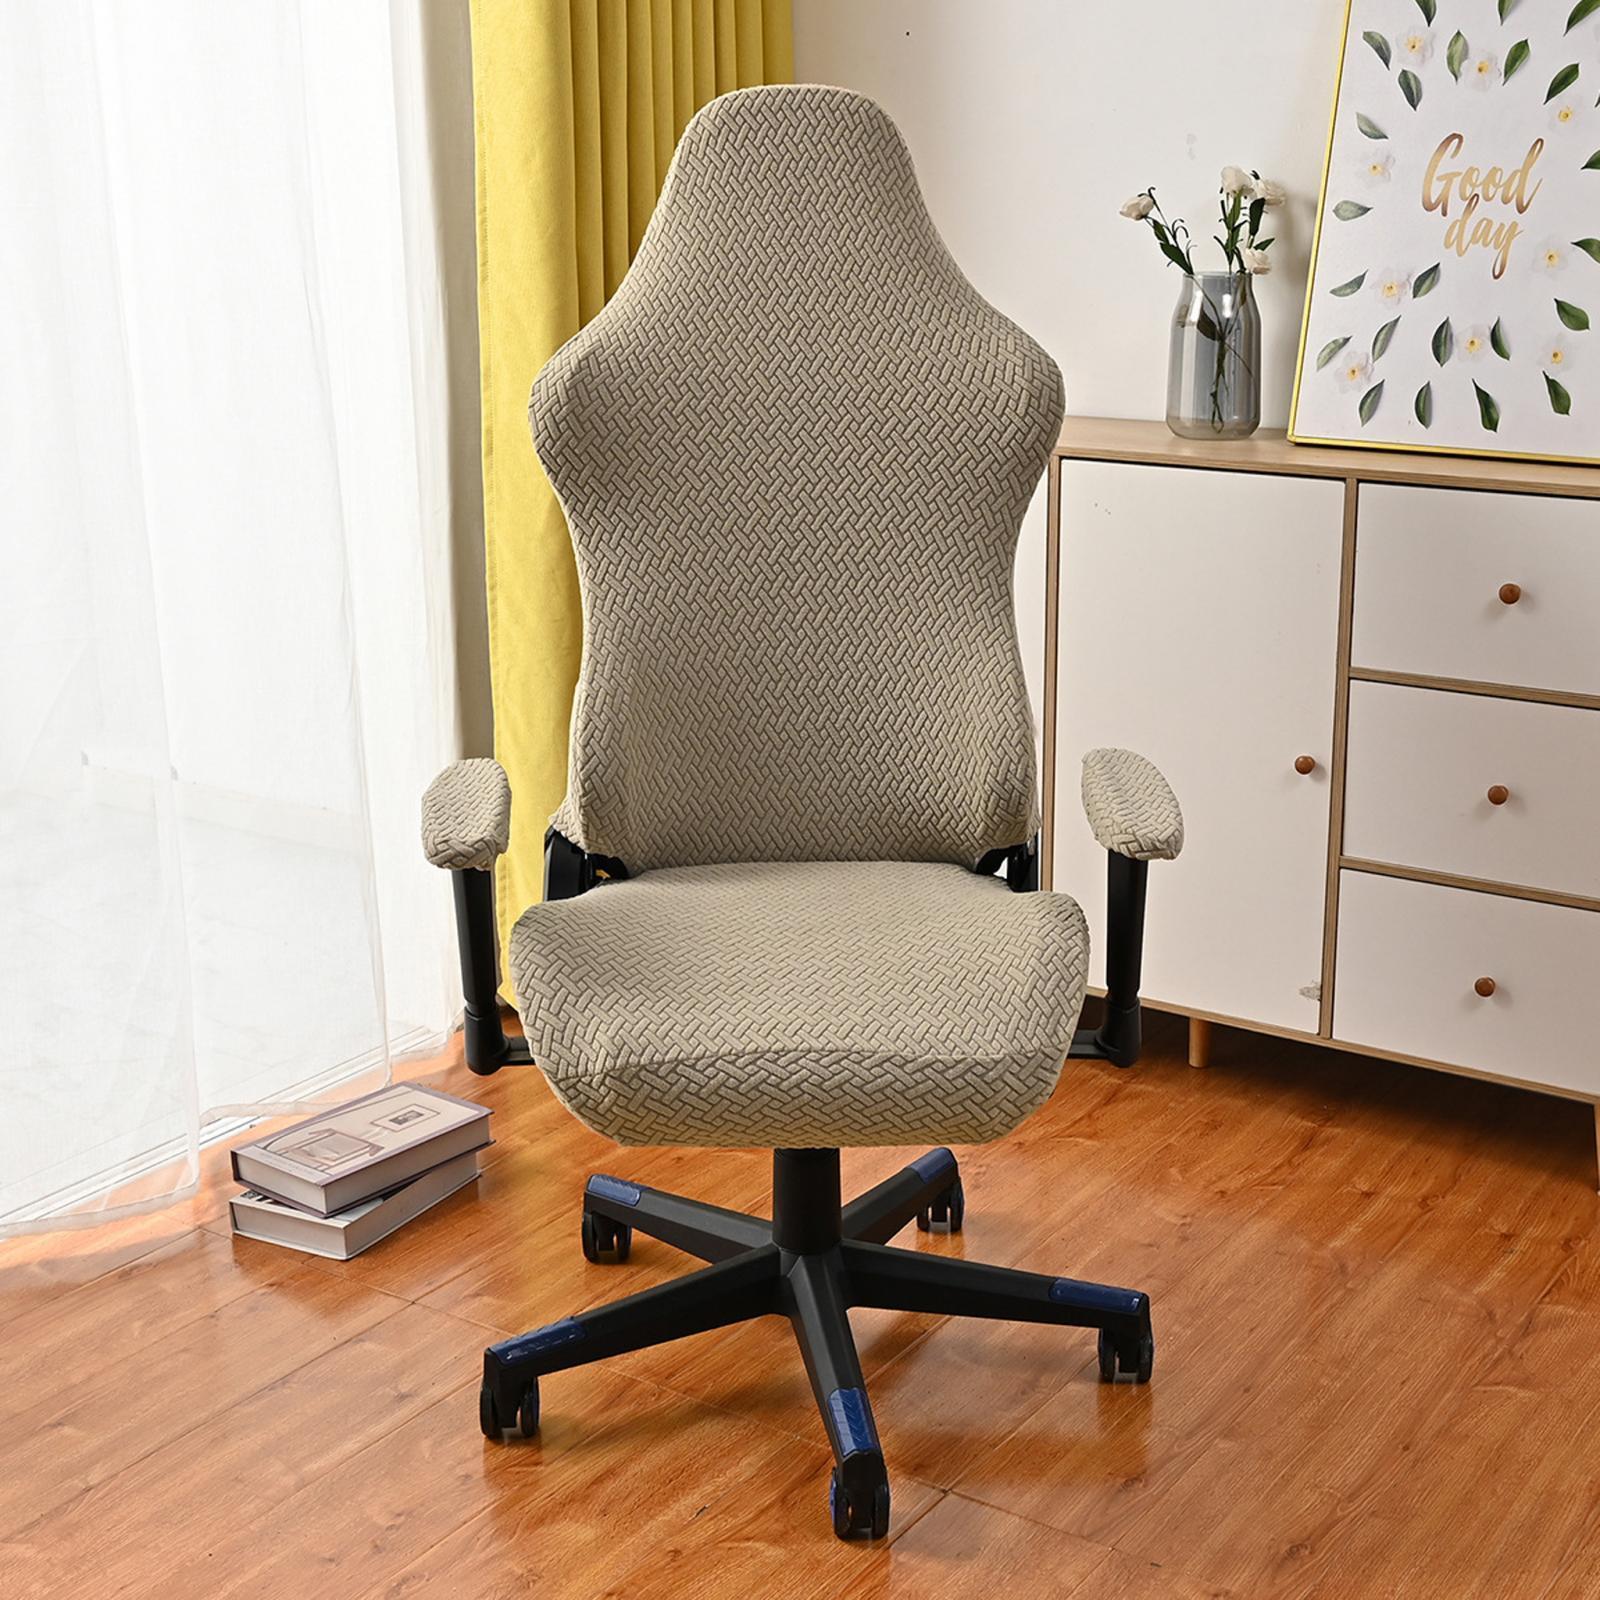 Office Computer Chair Slipcovers Soft for Swivel Chair Office Rotating Chair